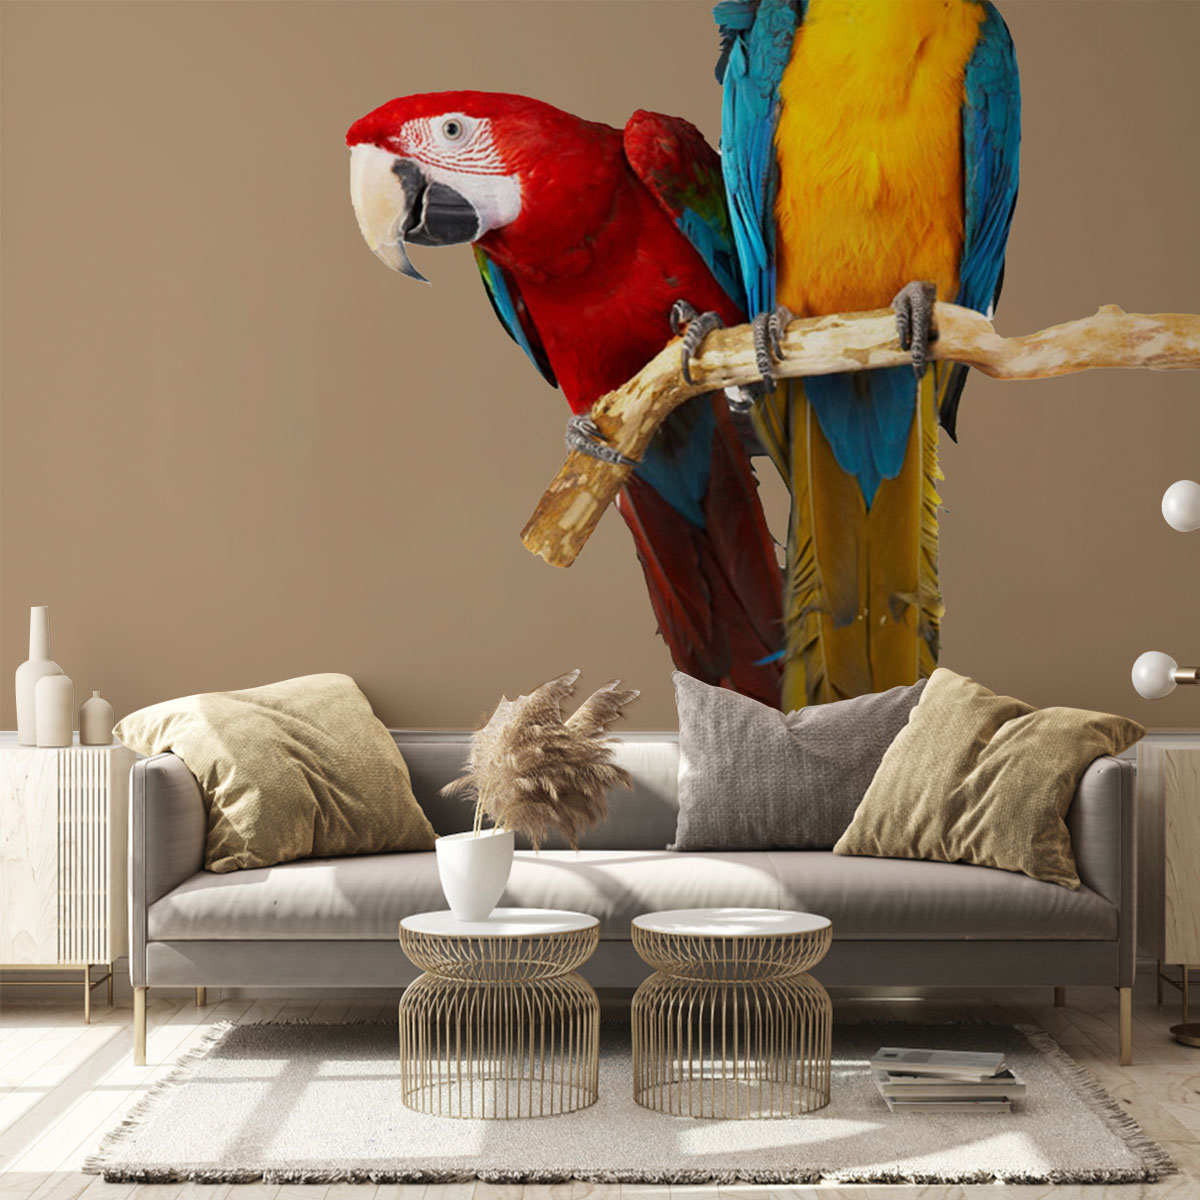 Vintage Parrot Wall Mural